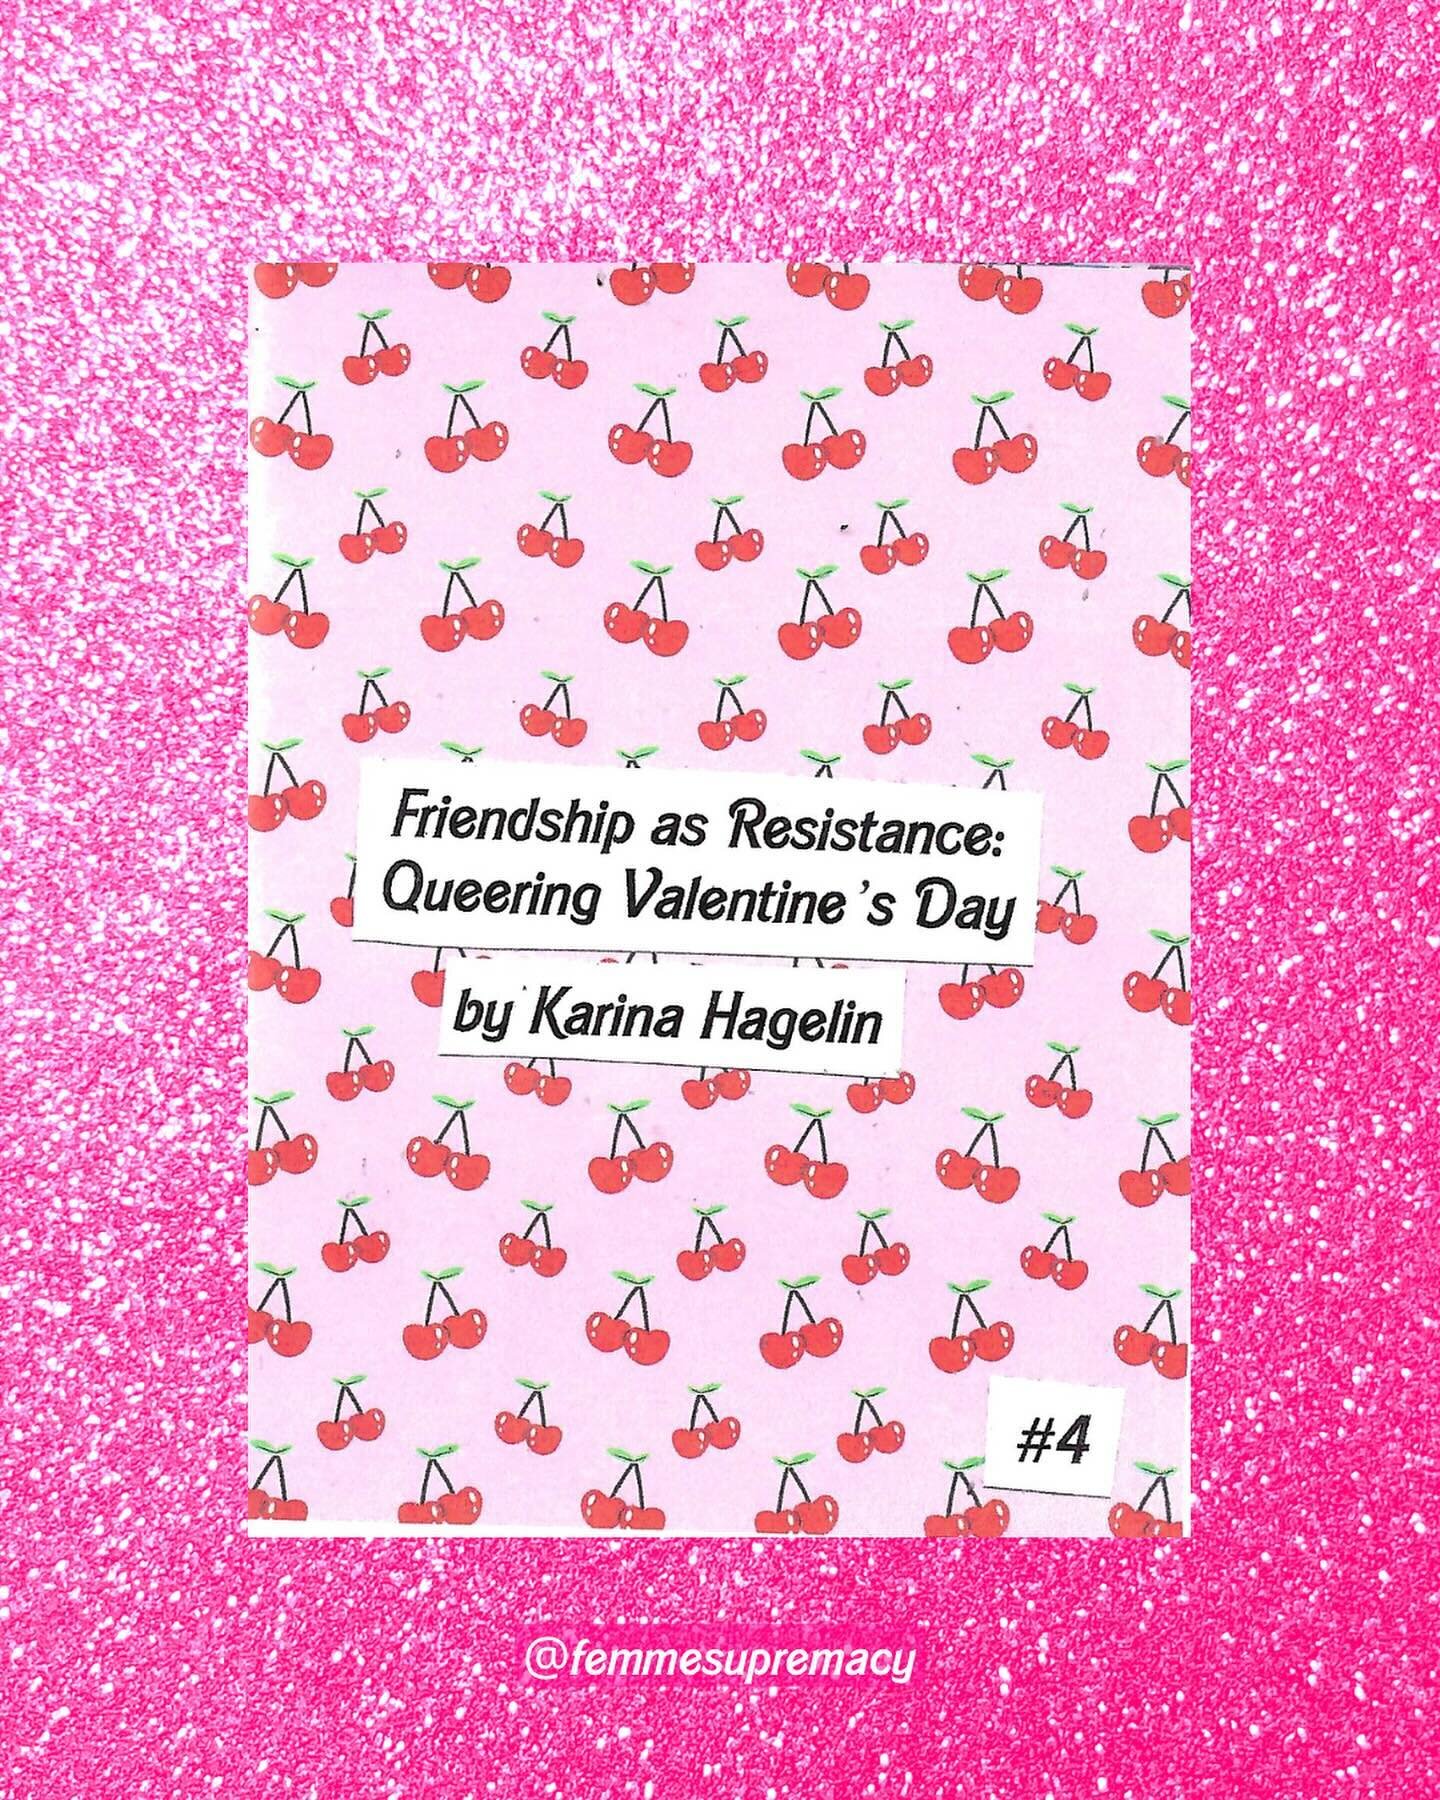 Happy Valentine&rsquo;s Day, bb 💘&nbsp;I want to share this zine I made on Queering Valentine&rsquo;s Day. This issue of Friendship as Resistance covers topics like platonic love, queer and trans friendships, mental health, surviving abuse and traum